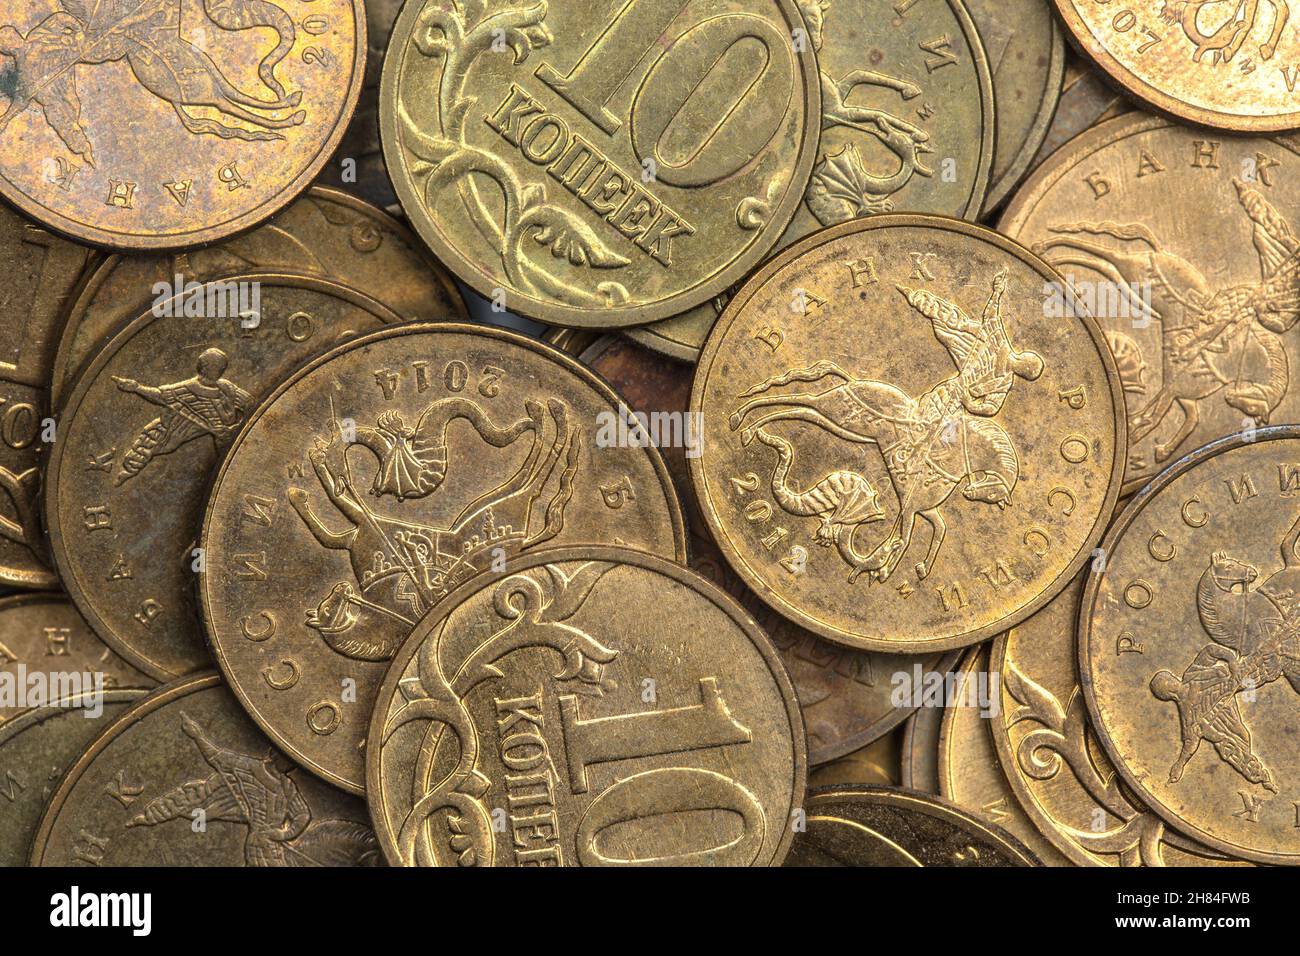 Directly above close up of the pile of Russian kopeks. Stock Photo